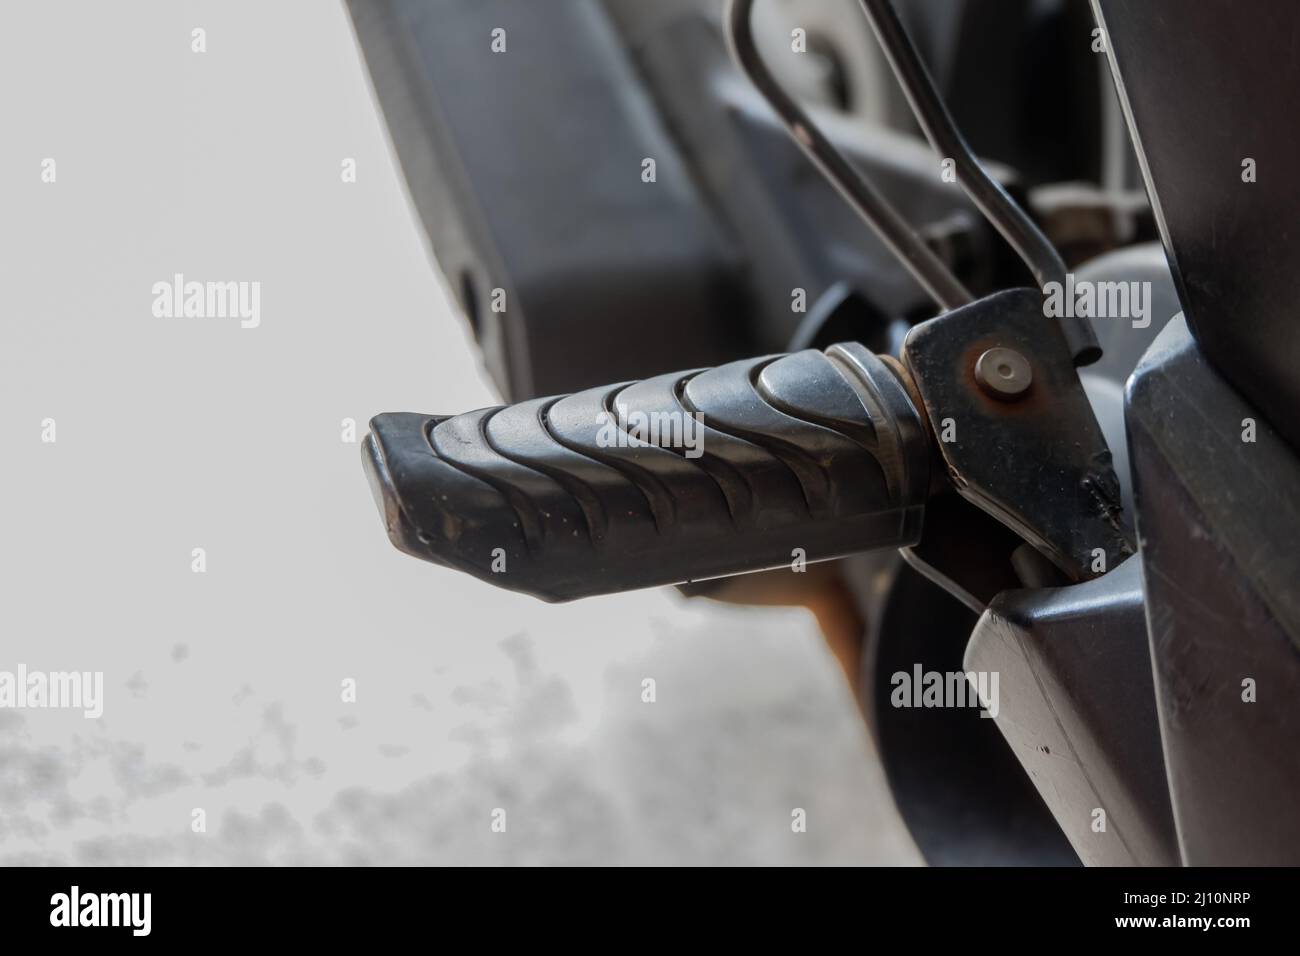 close up of motorcycle foot peg made of iron and black rubber Stock Photo